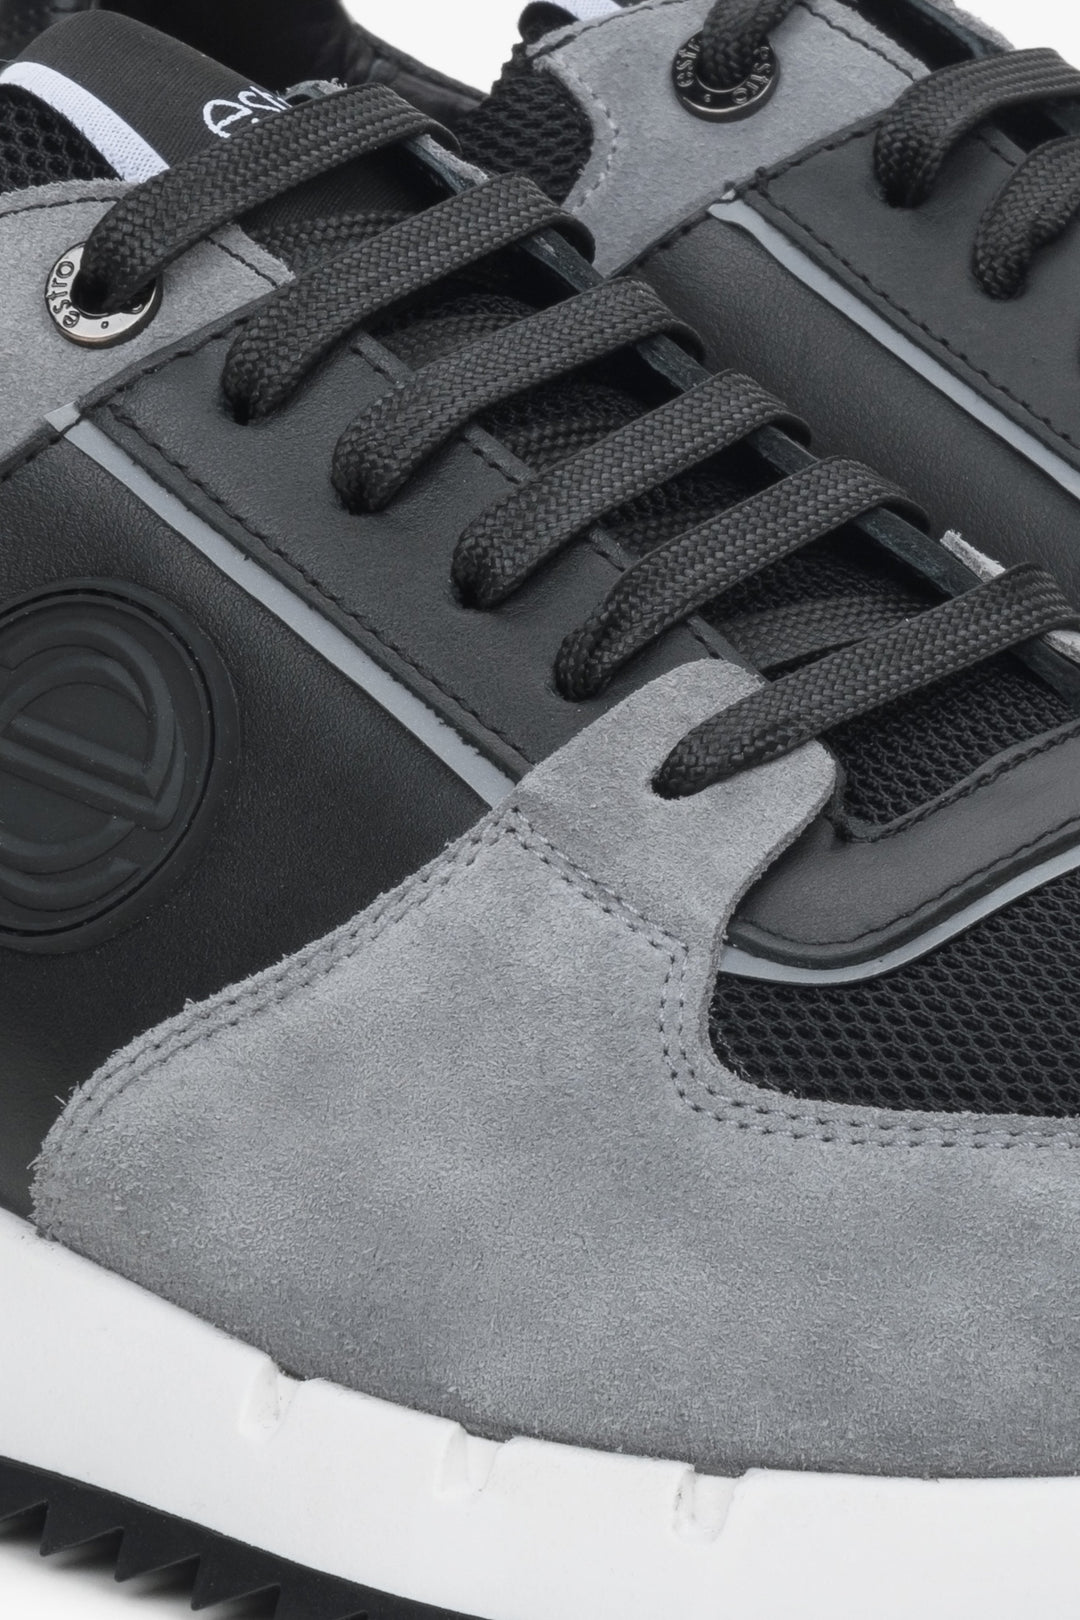 Estro men's black and grey sneakers - close-up on details.